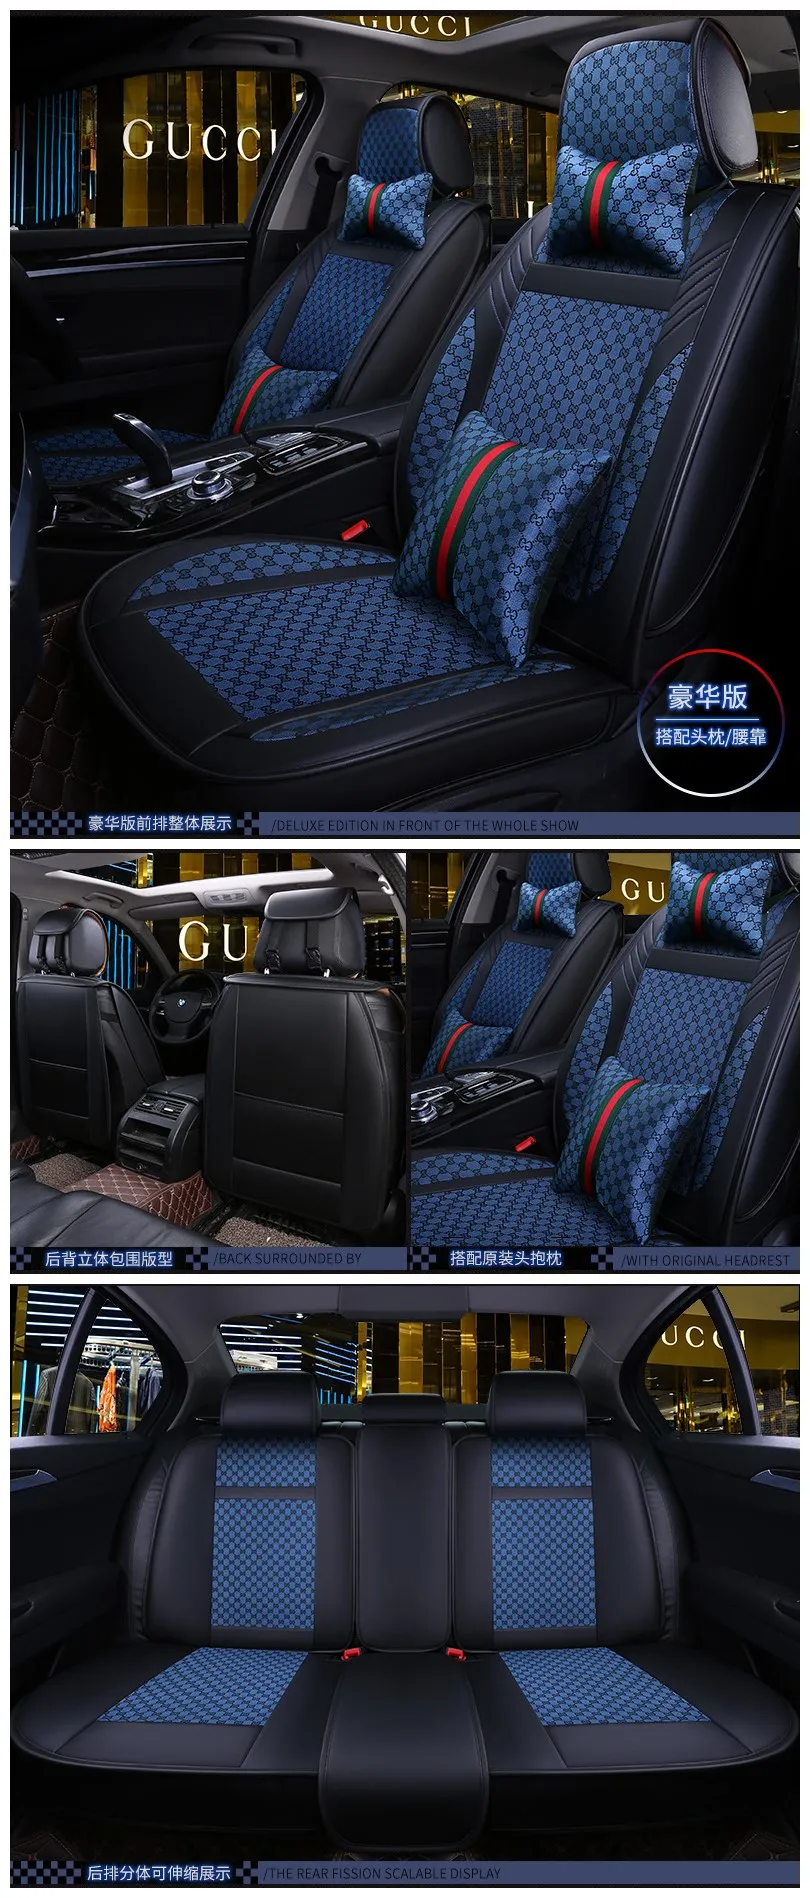 Luxury Design Car Seat Covers Hot P7908 Buy Car Seat Covers